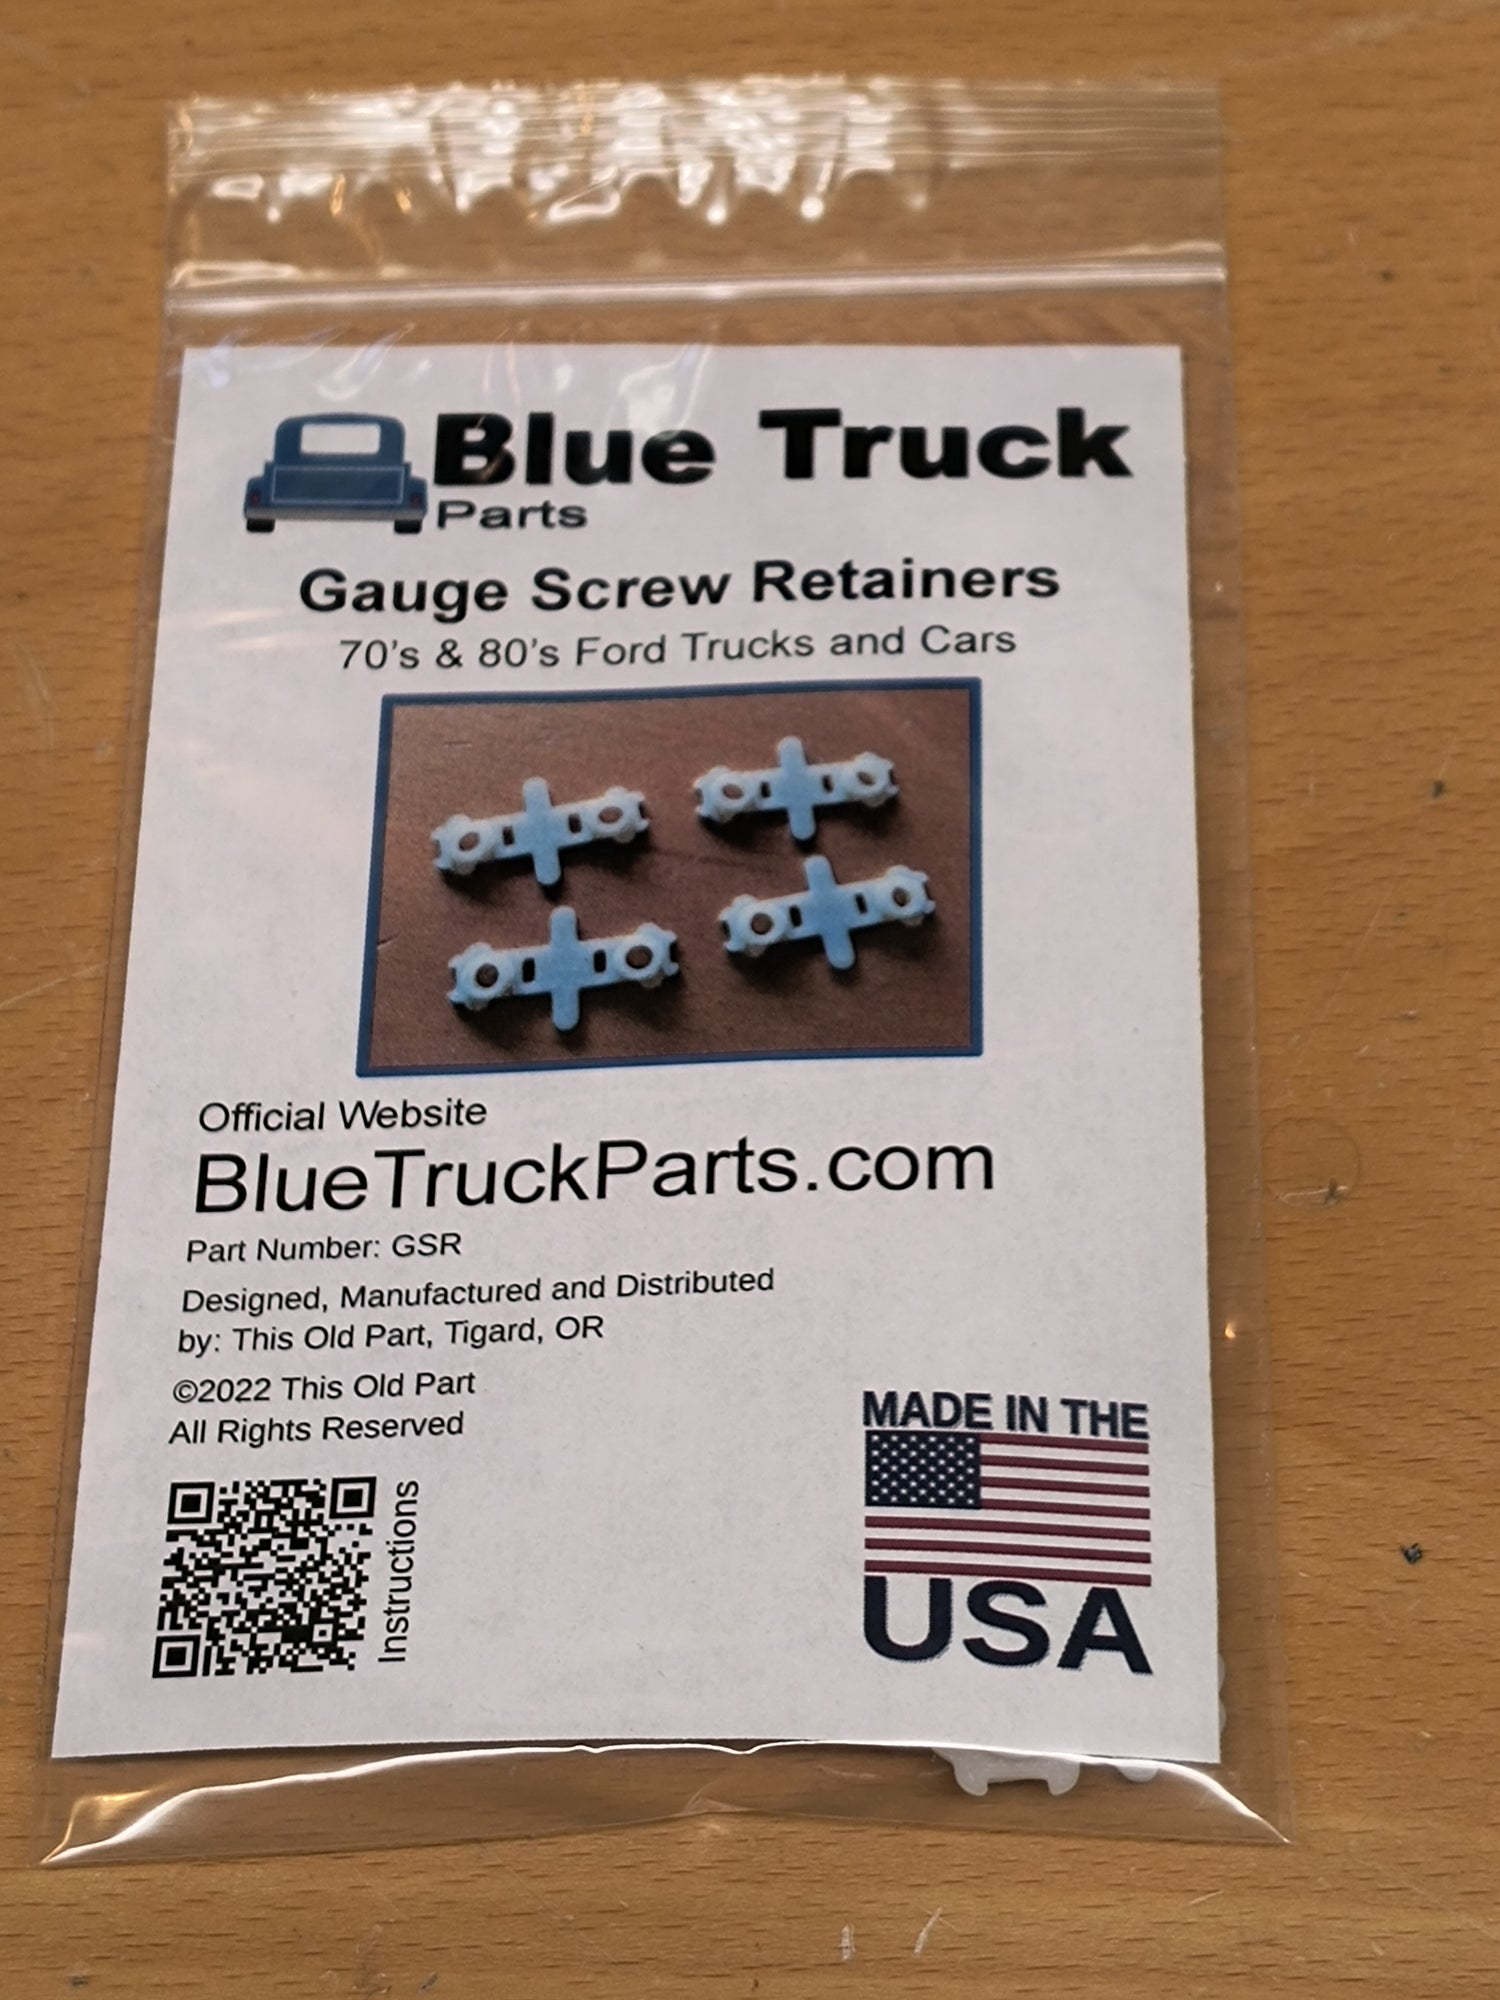 Blue Truck Parts Gauge Screw Retainers for 70's and 80's Ford Trucks and Cars